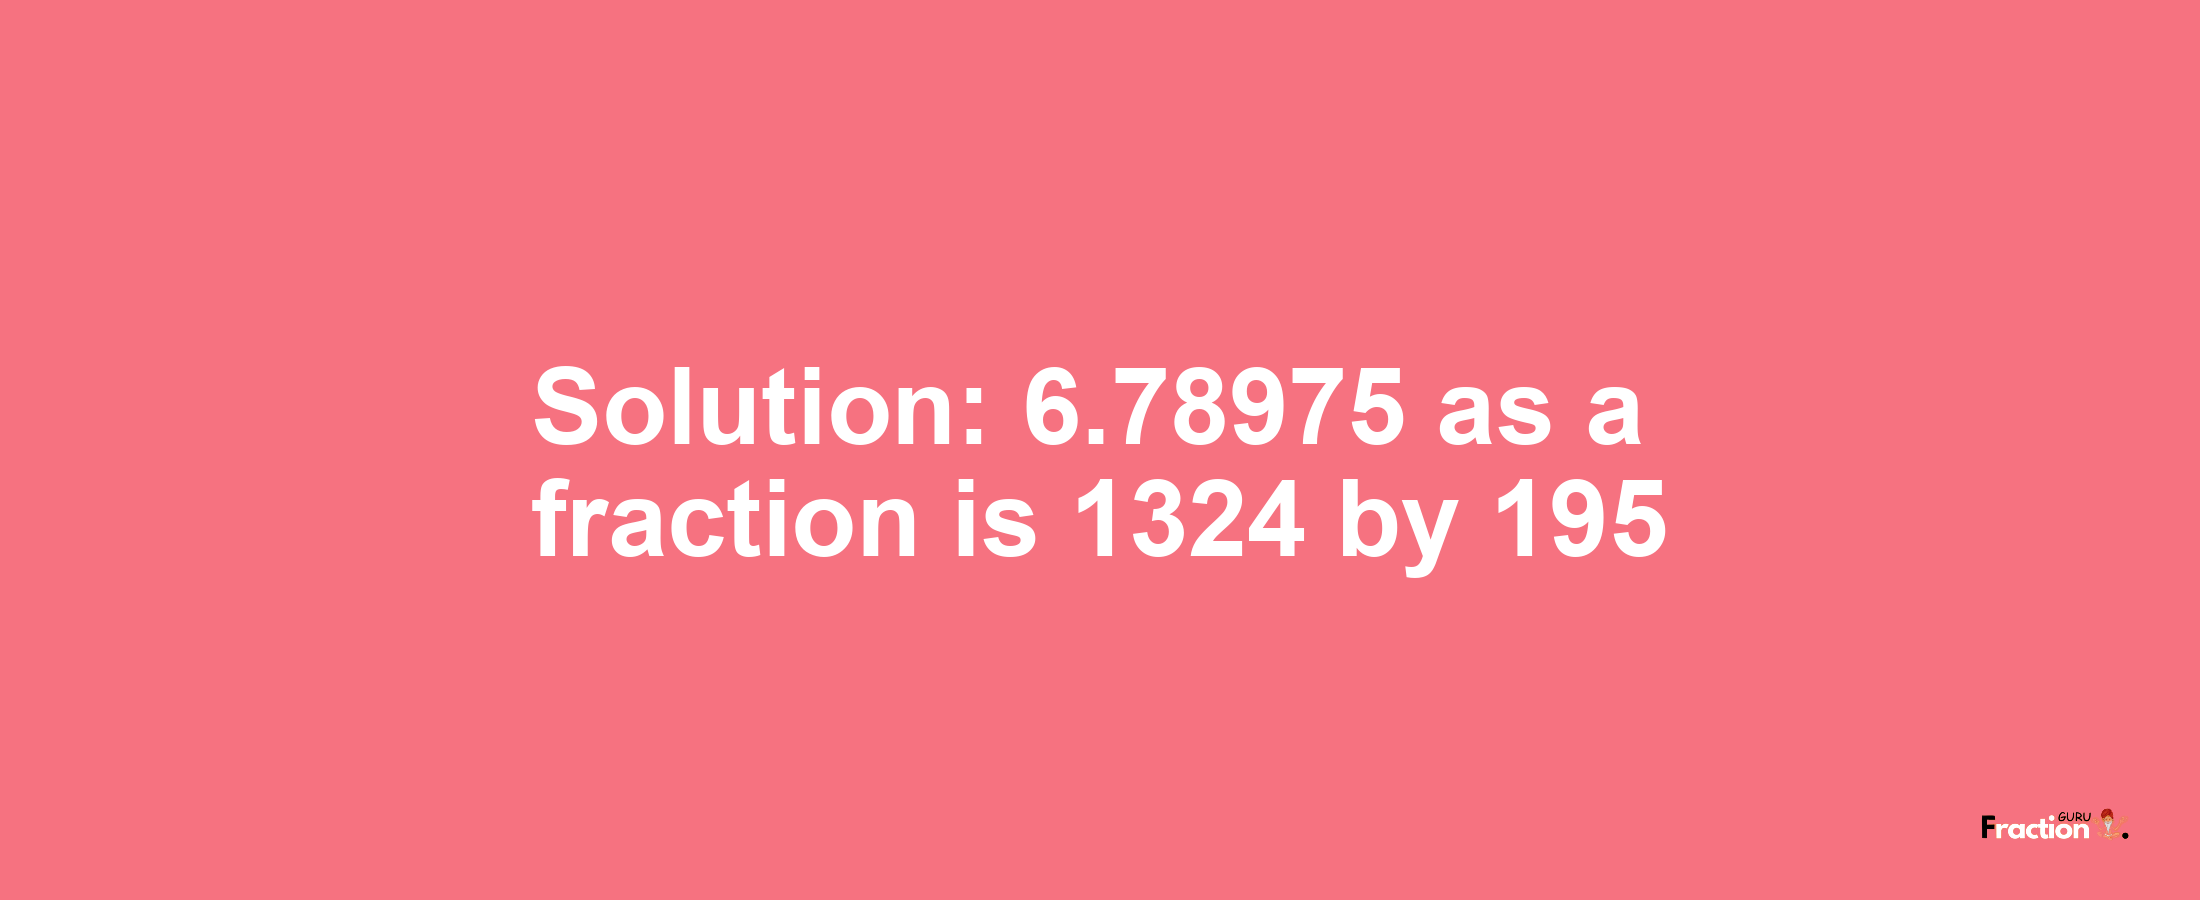 Solution:6.78975 as a fraction is 1324/195